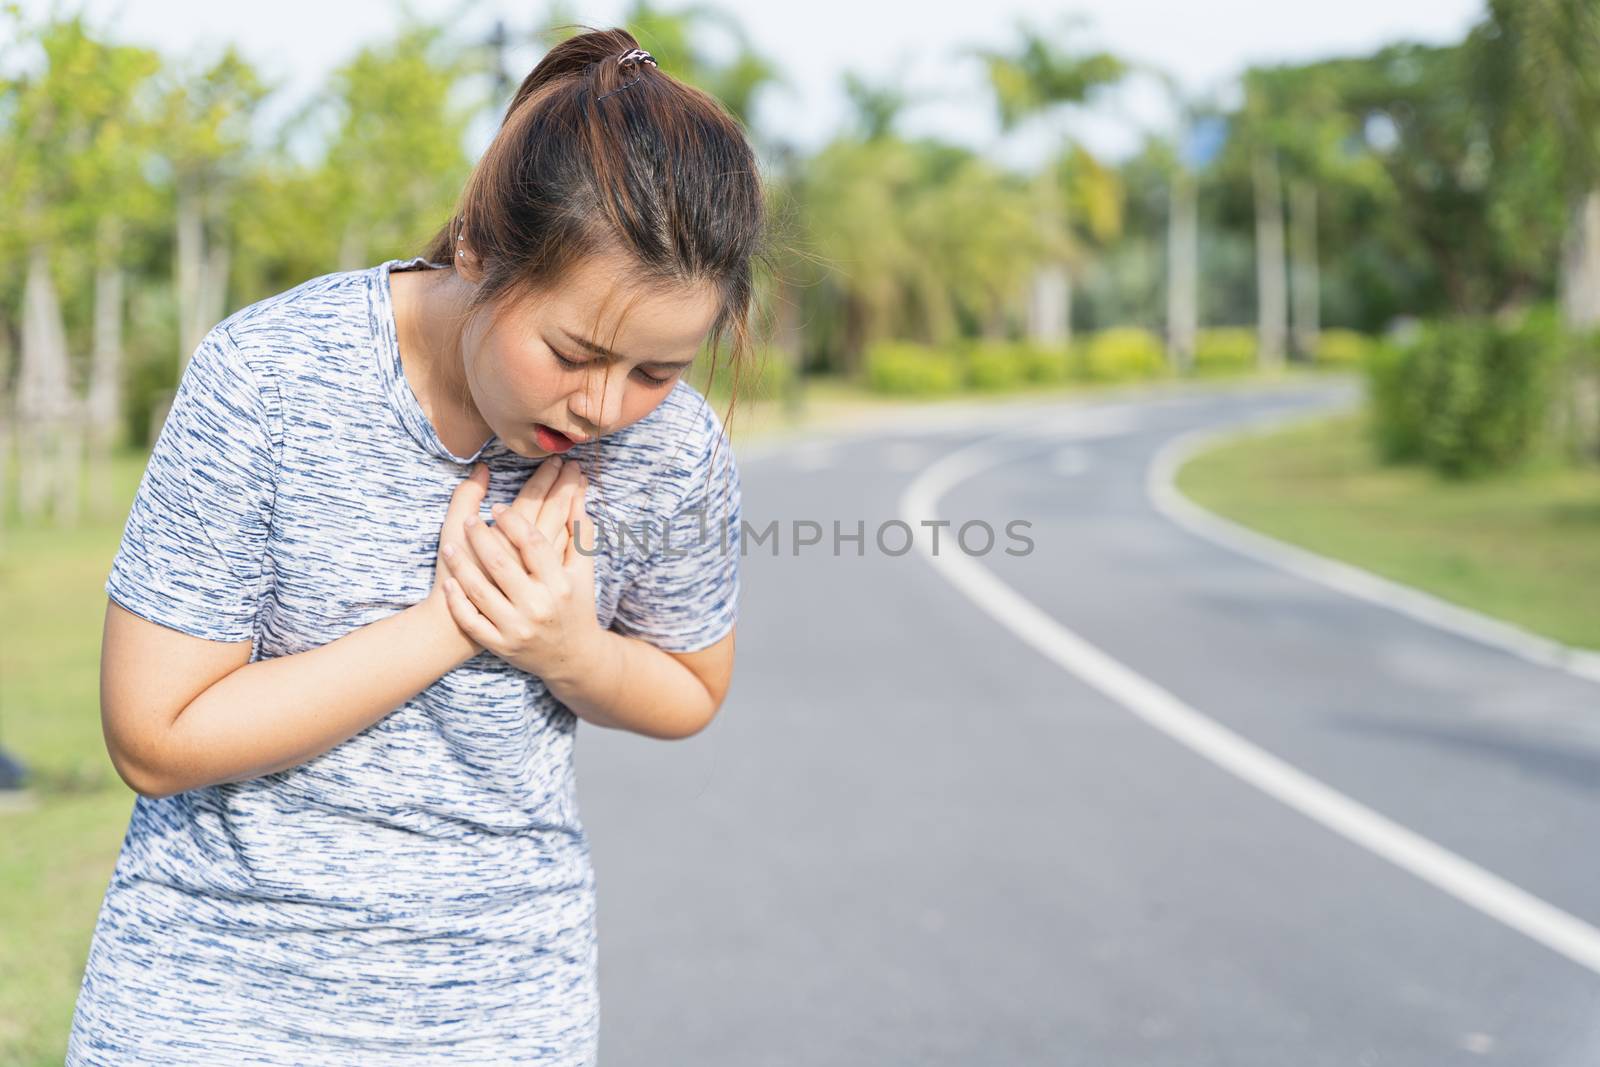 Exhausted female runner suffering painful angina pectoris or asthma breathing problems after training hard on summer. Running over training consequence.